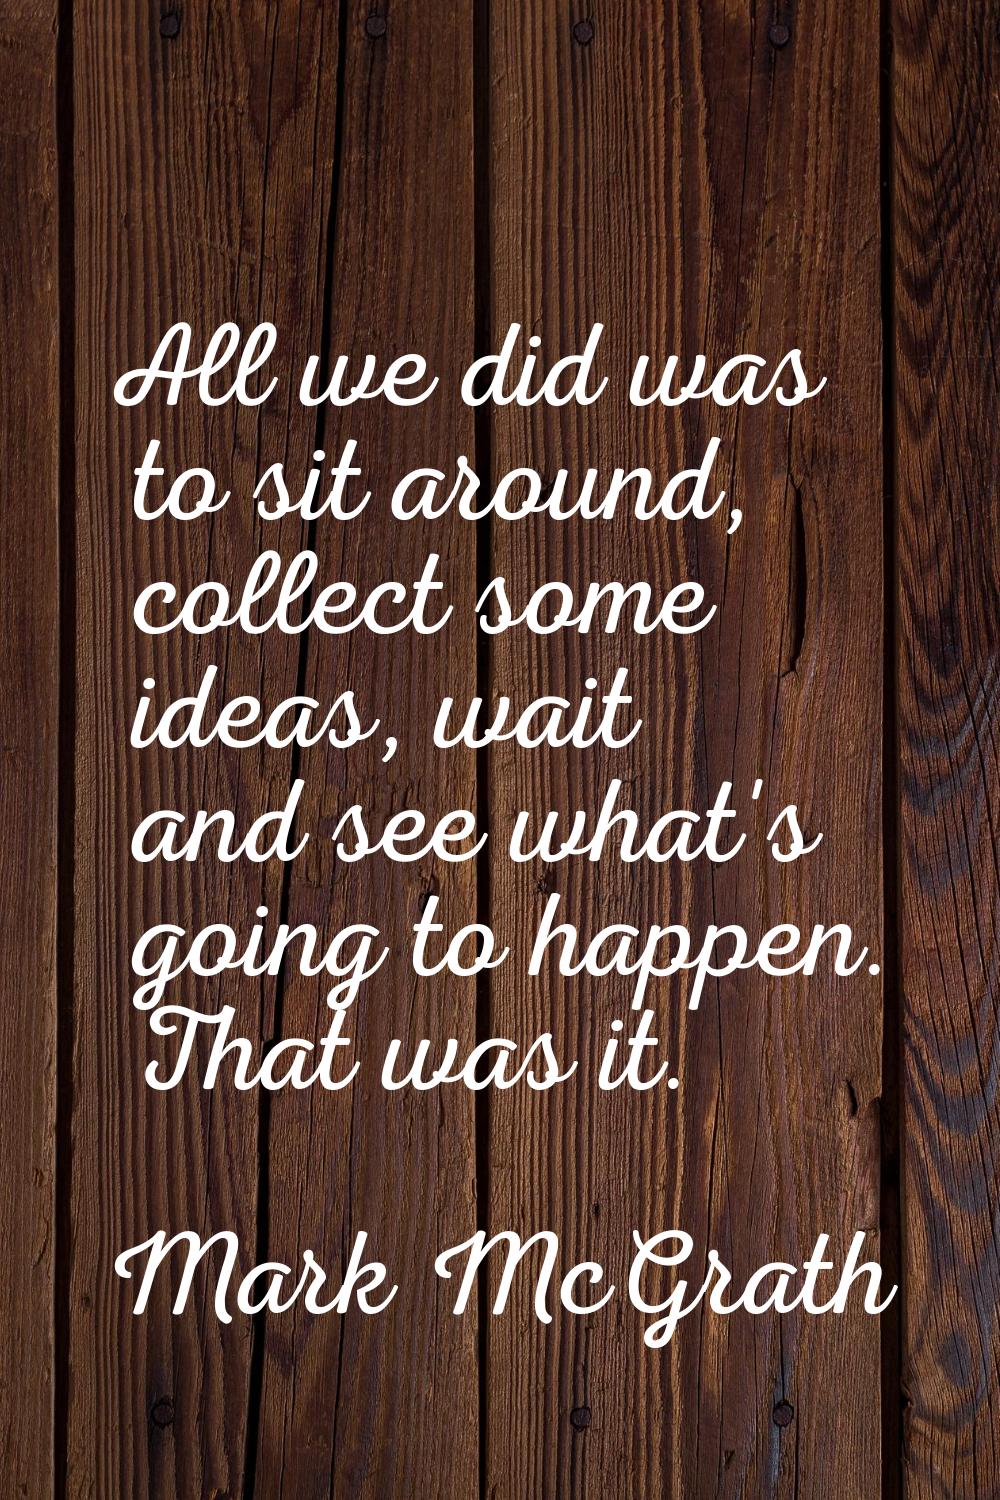 All we did was to sit around, collect some ideas, wait and see what's going to happen. That was it.